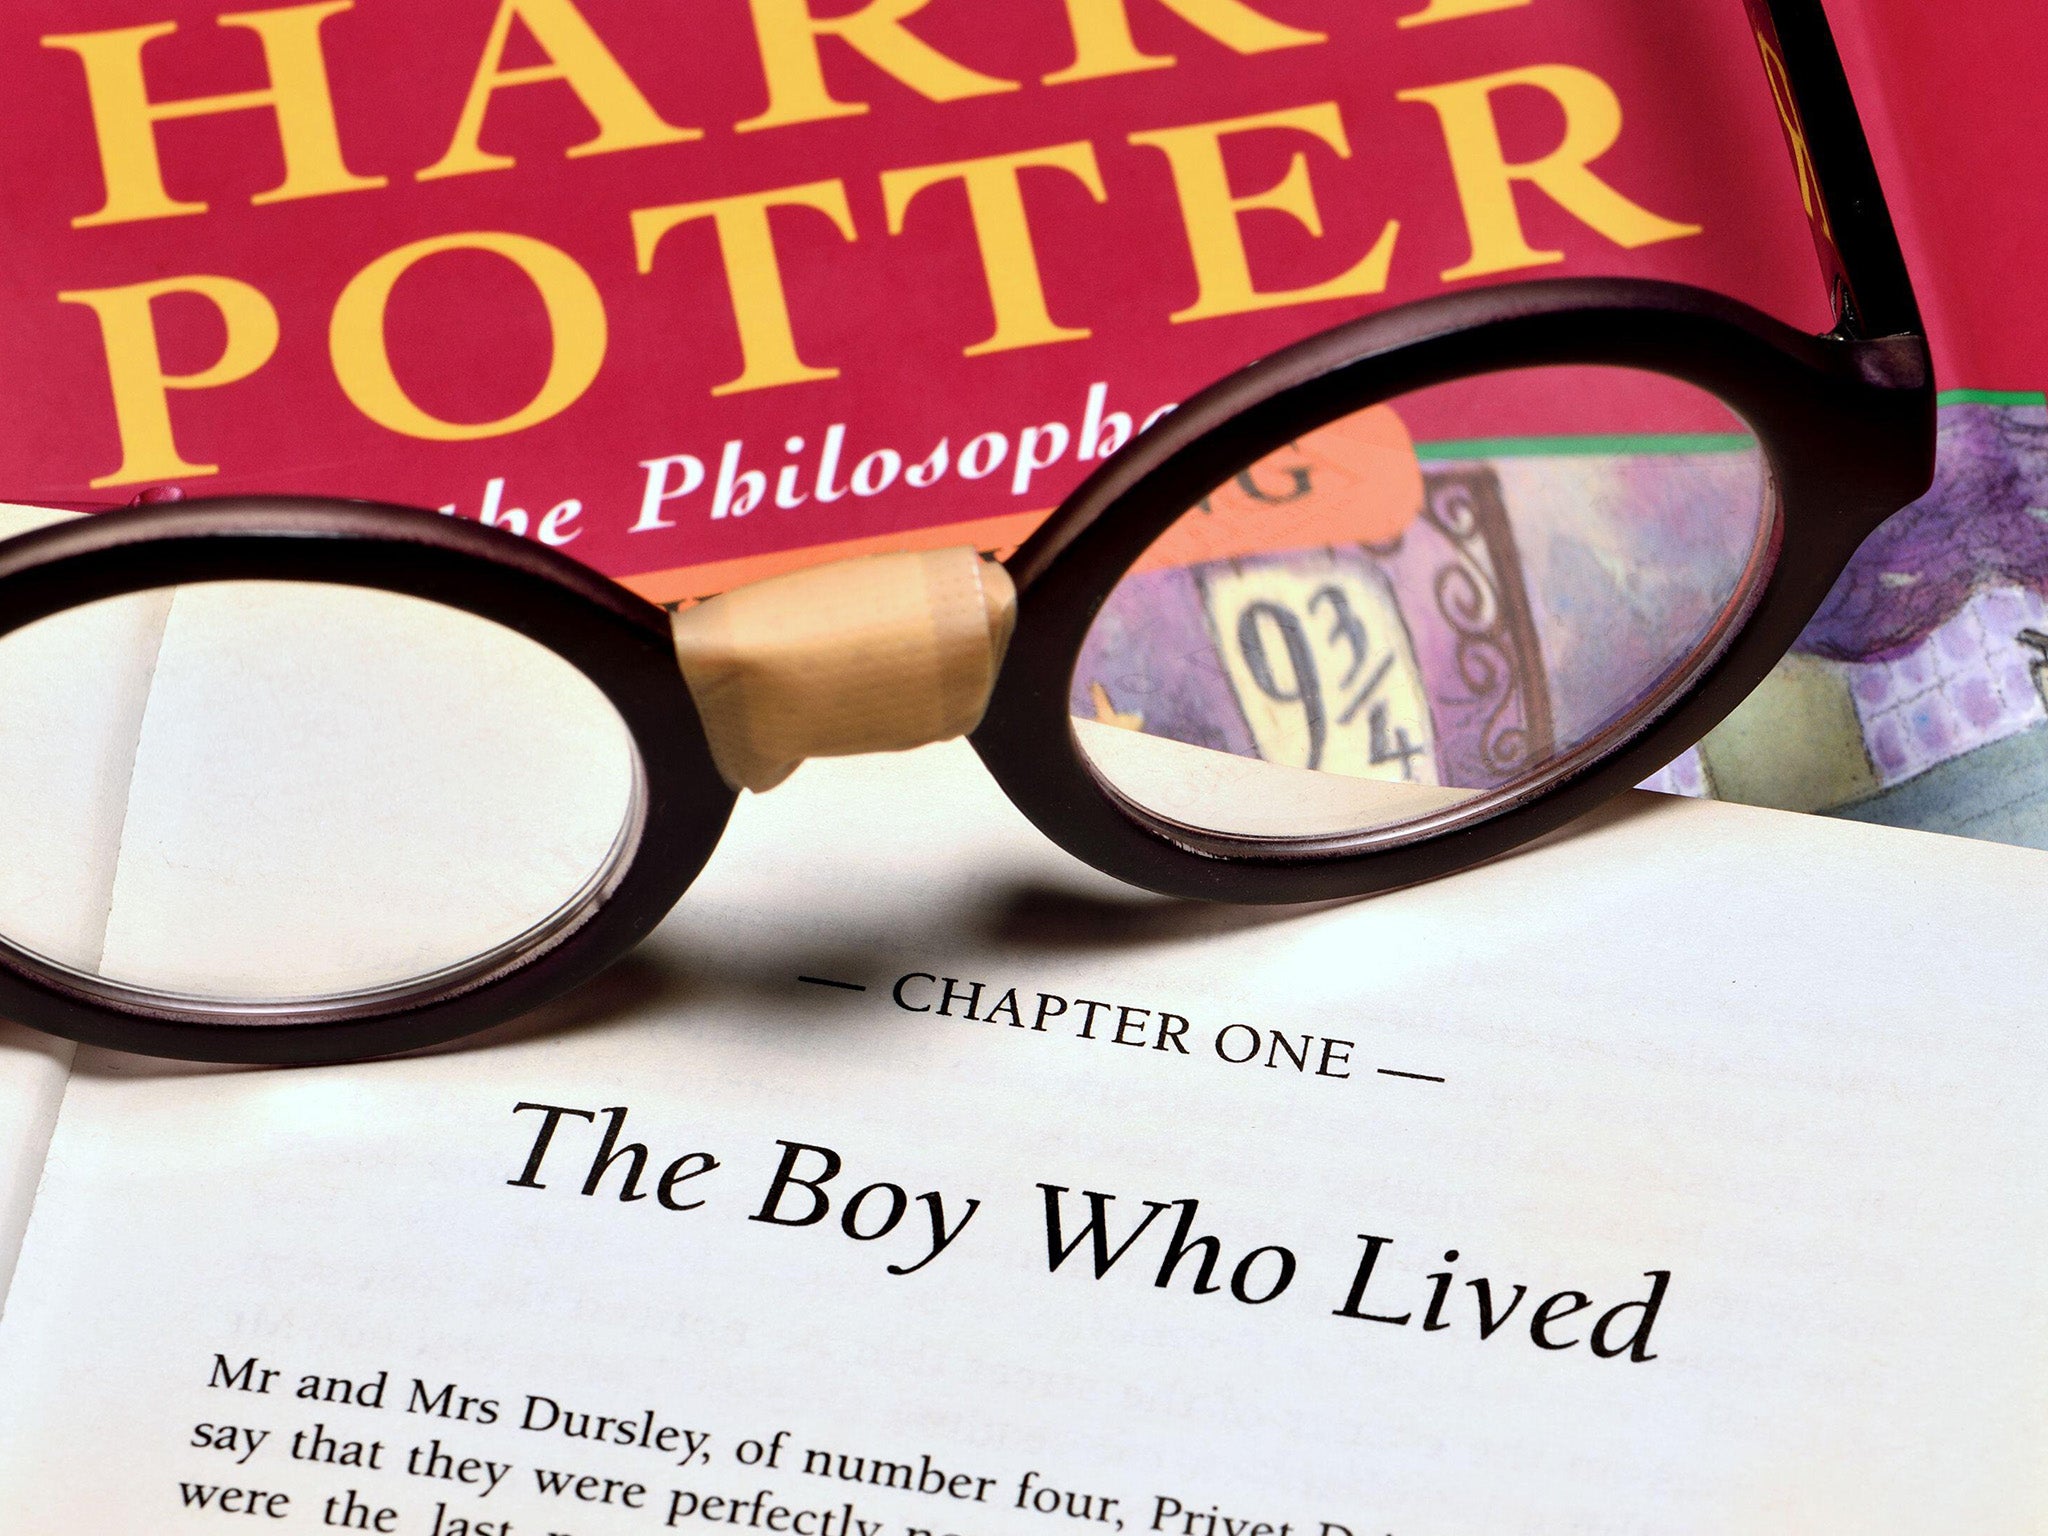 The boy who took over the world, ‘Harry Potter and the Philosopher’s Stone’ has sold over 140 million copies worldwide